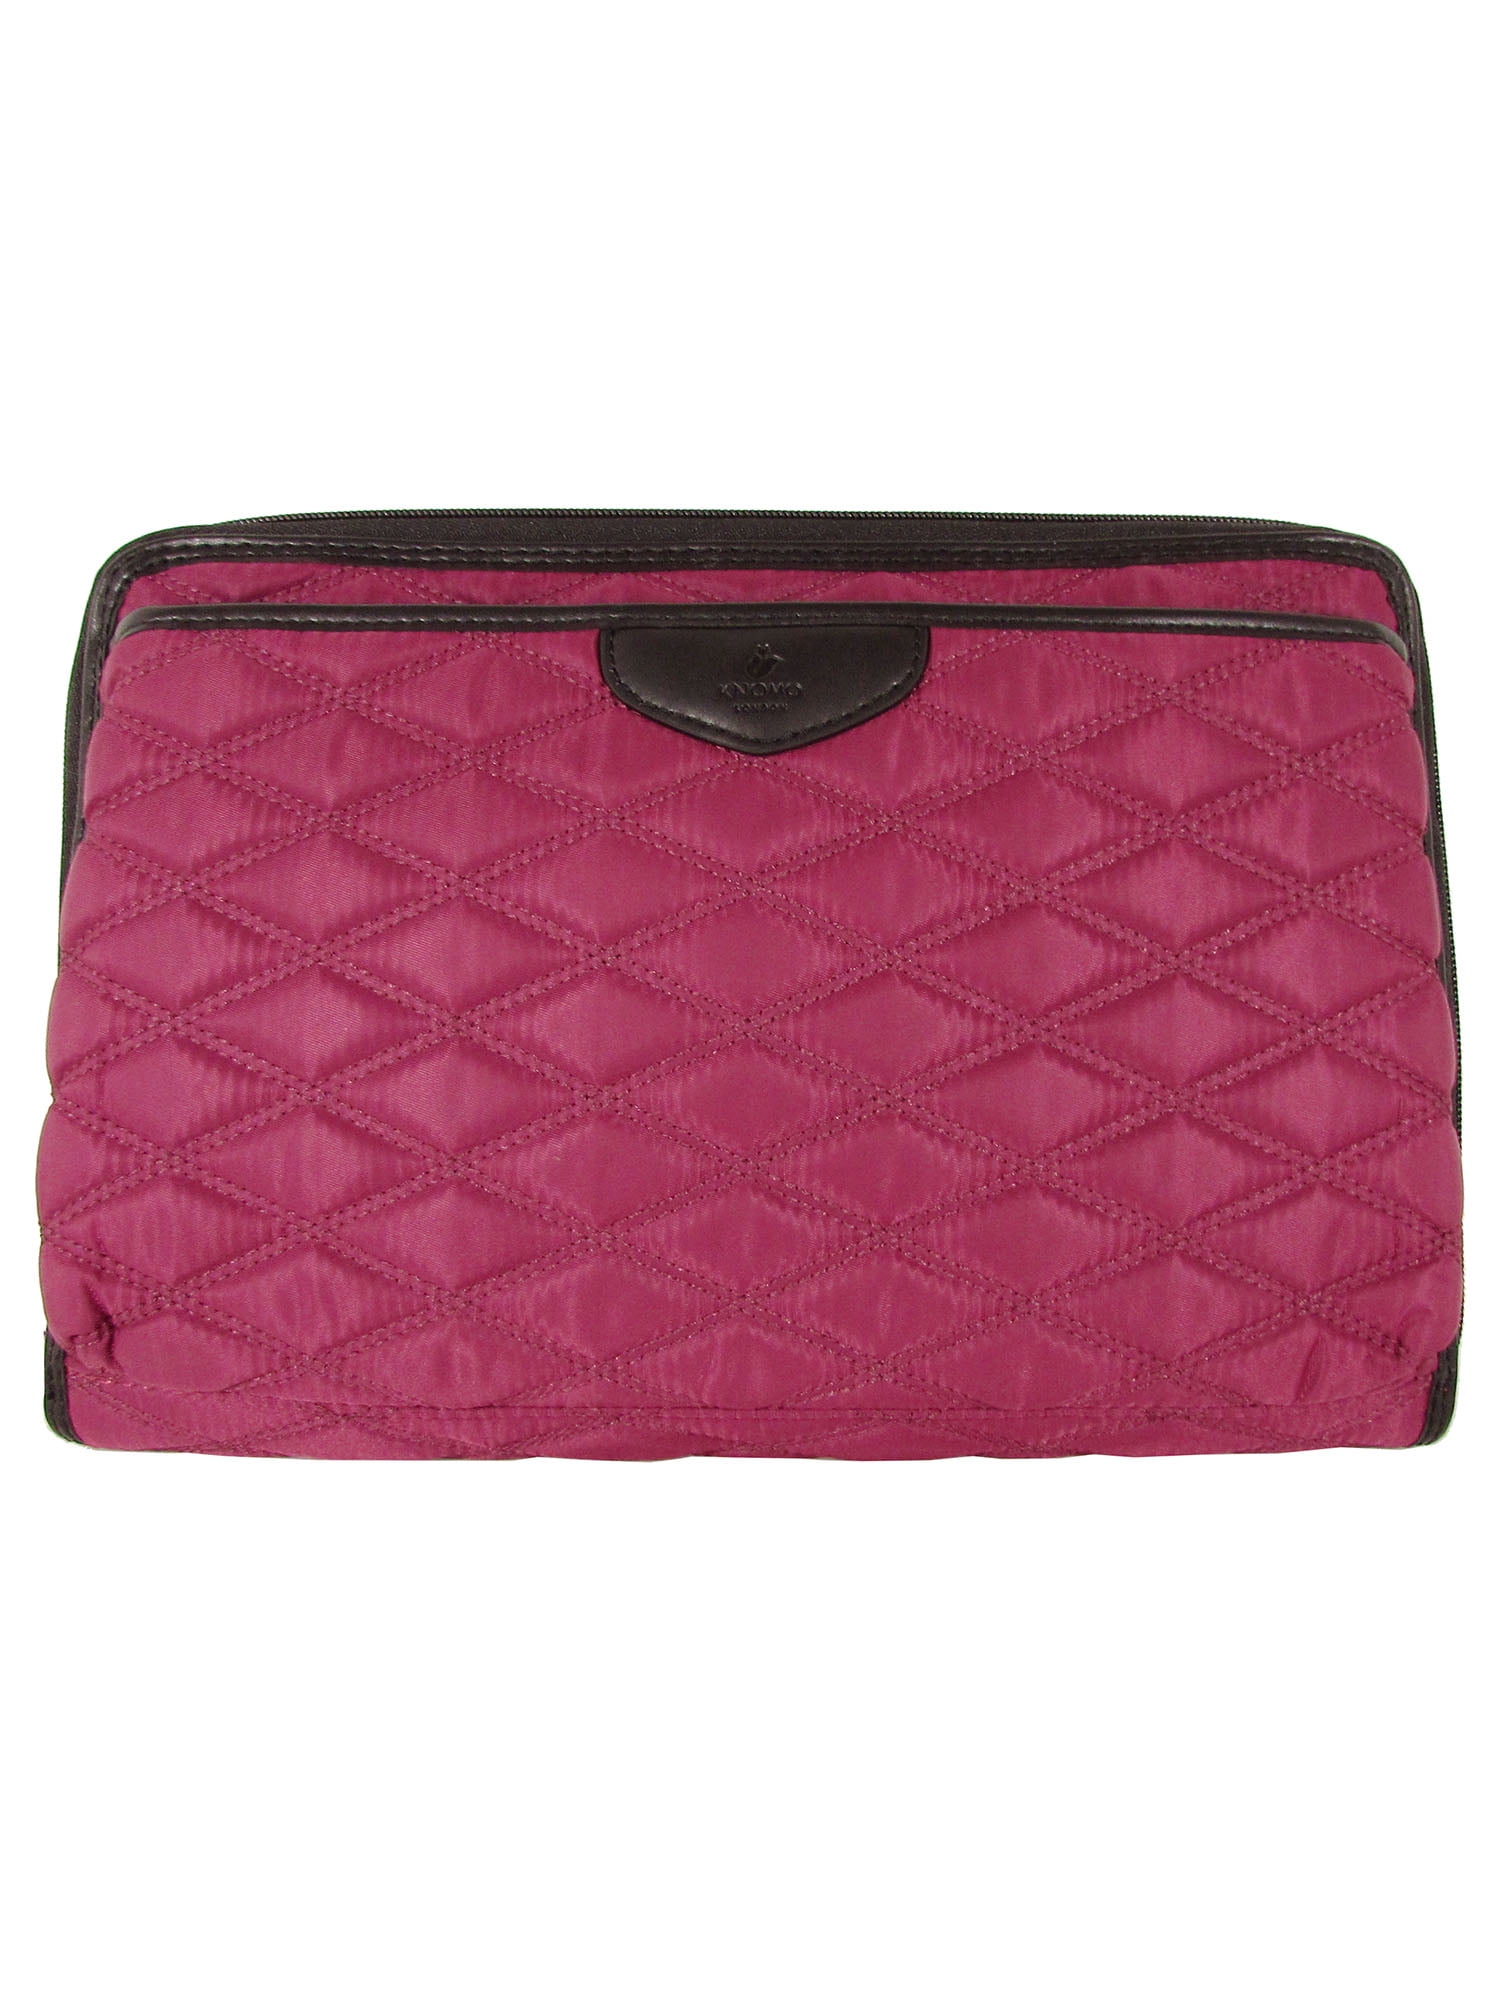 Knomo Sleeve for any Laptop or Tablet up to 11"  Free Shipping 